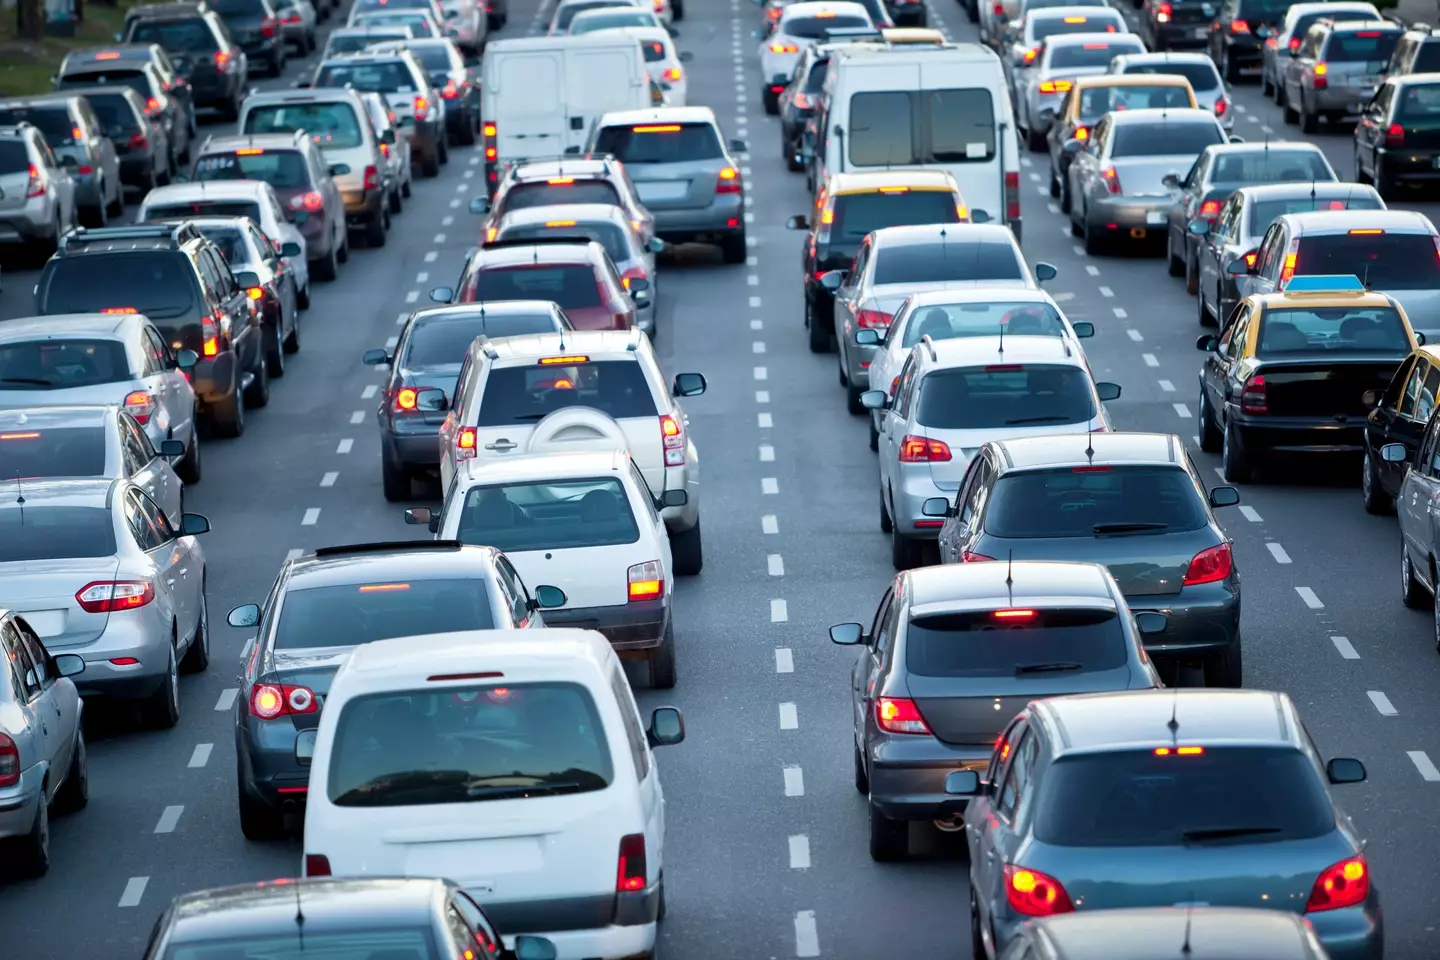 Cars bumper to bumper will be a common sight (Getty Stock Images)